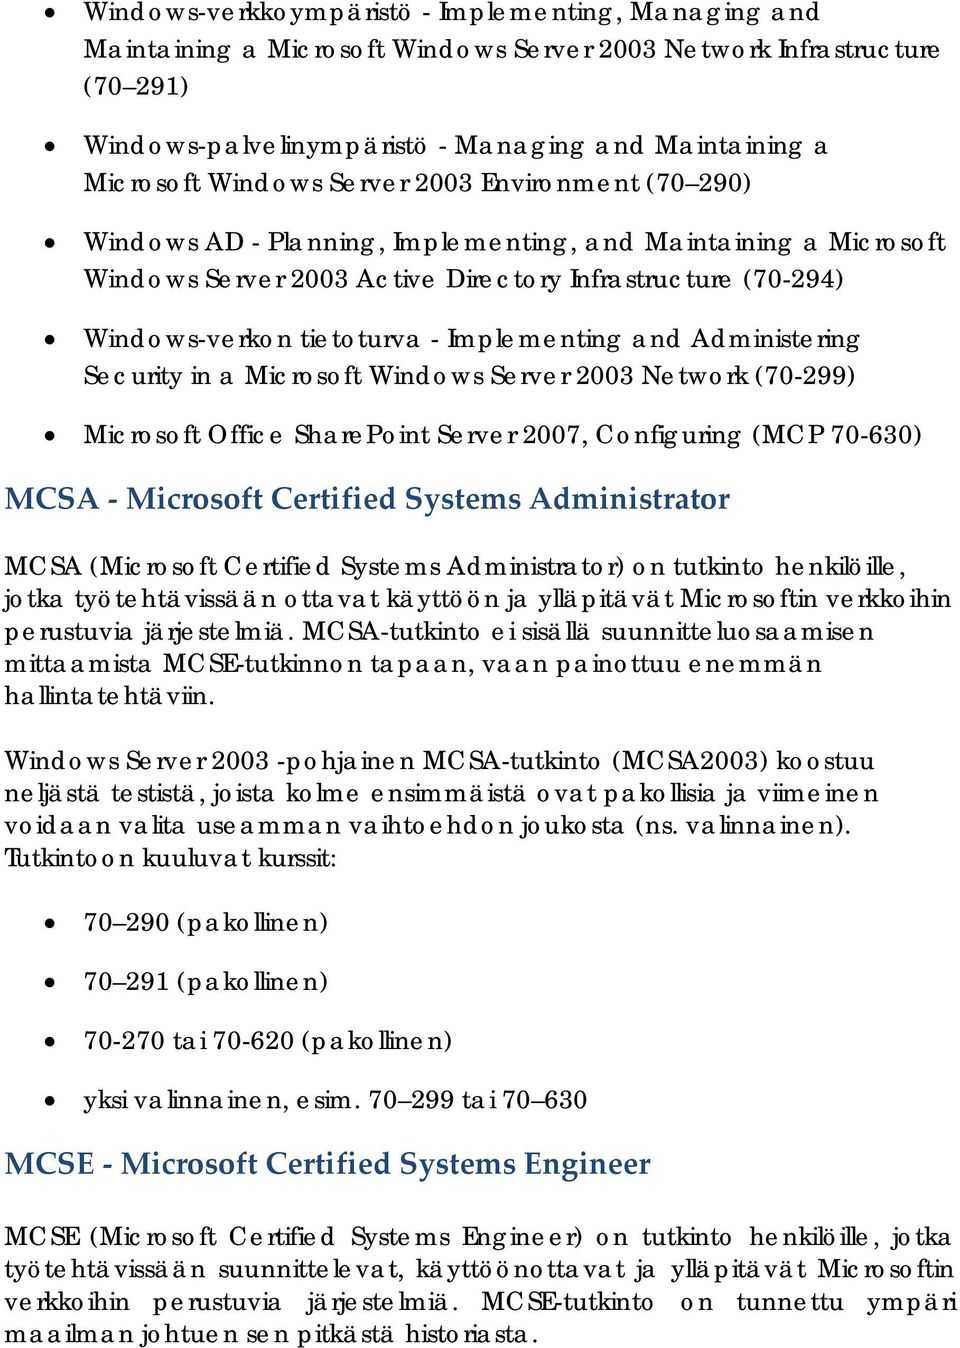 Implementing and Administering Security in a Microsoft Windows Server 2003 Network (70-299) Microsoft Office SharePoint Server 2007, Configuring (MCP 70-630) MCSA Microsoft Certified Systems